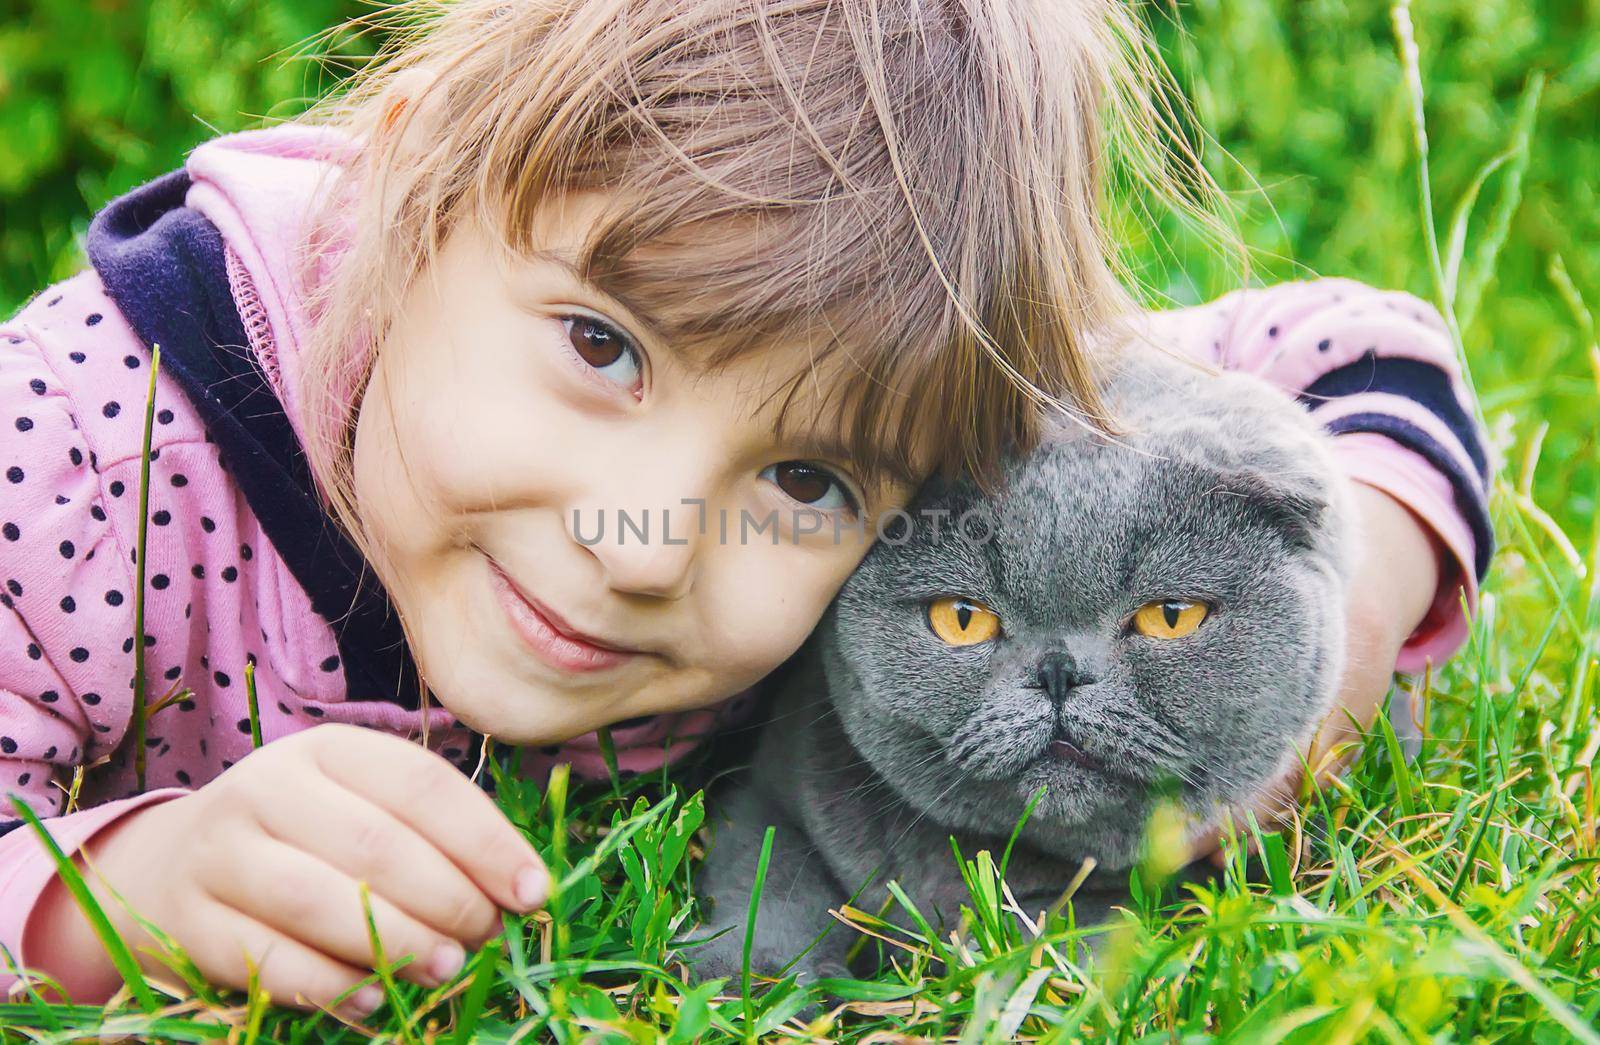 A child and a cat. Selective focus.